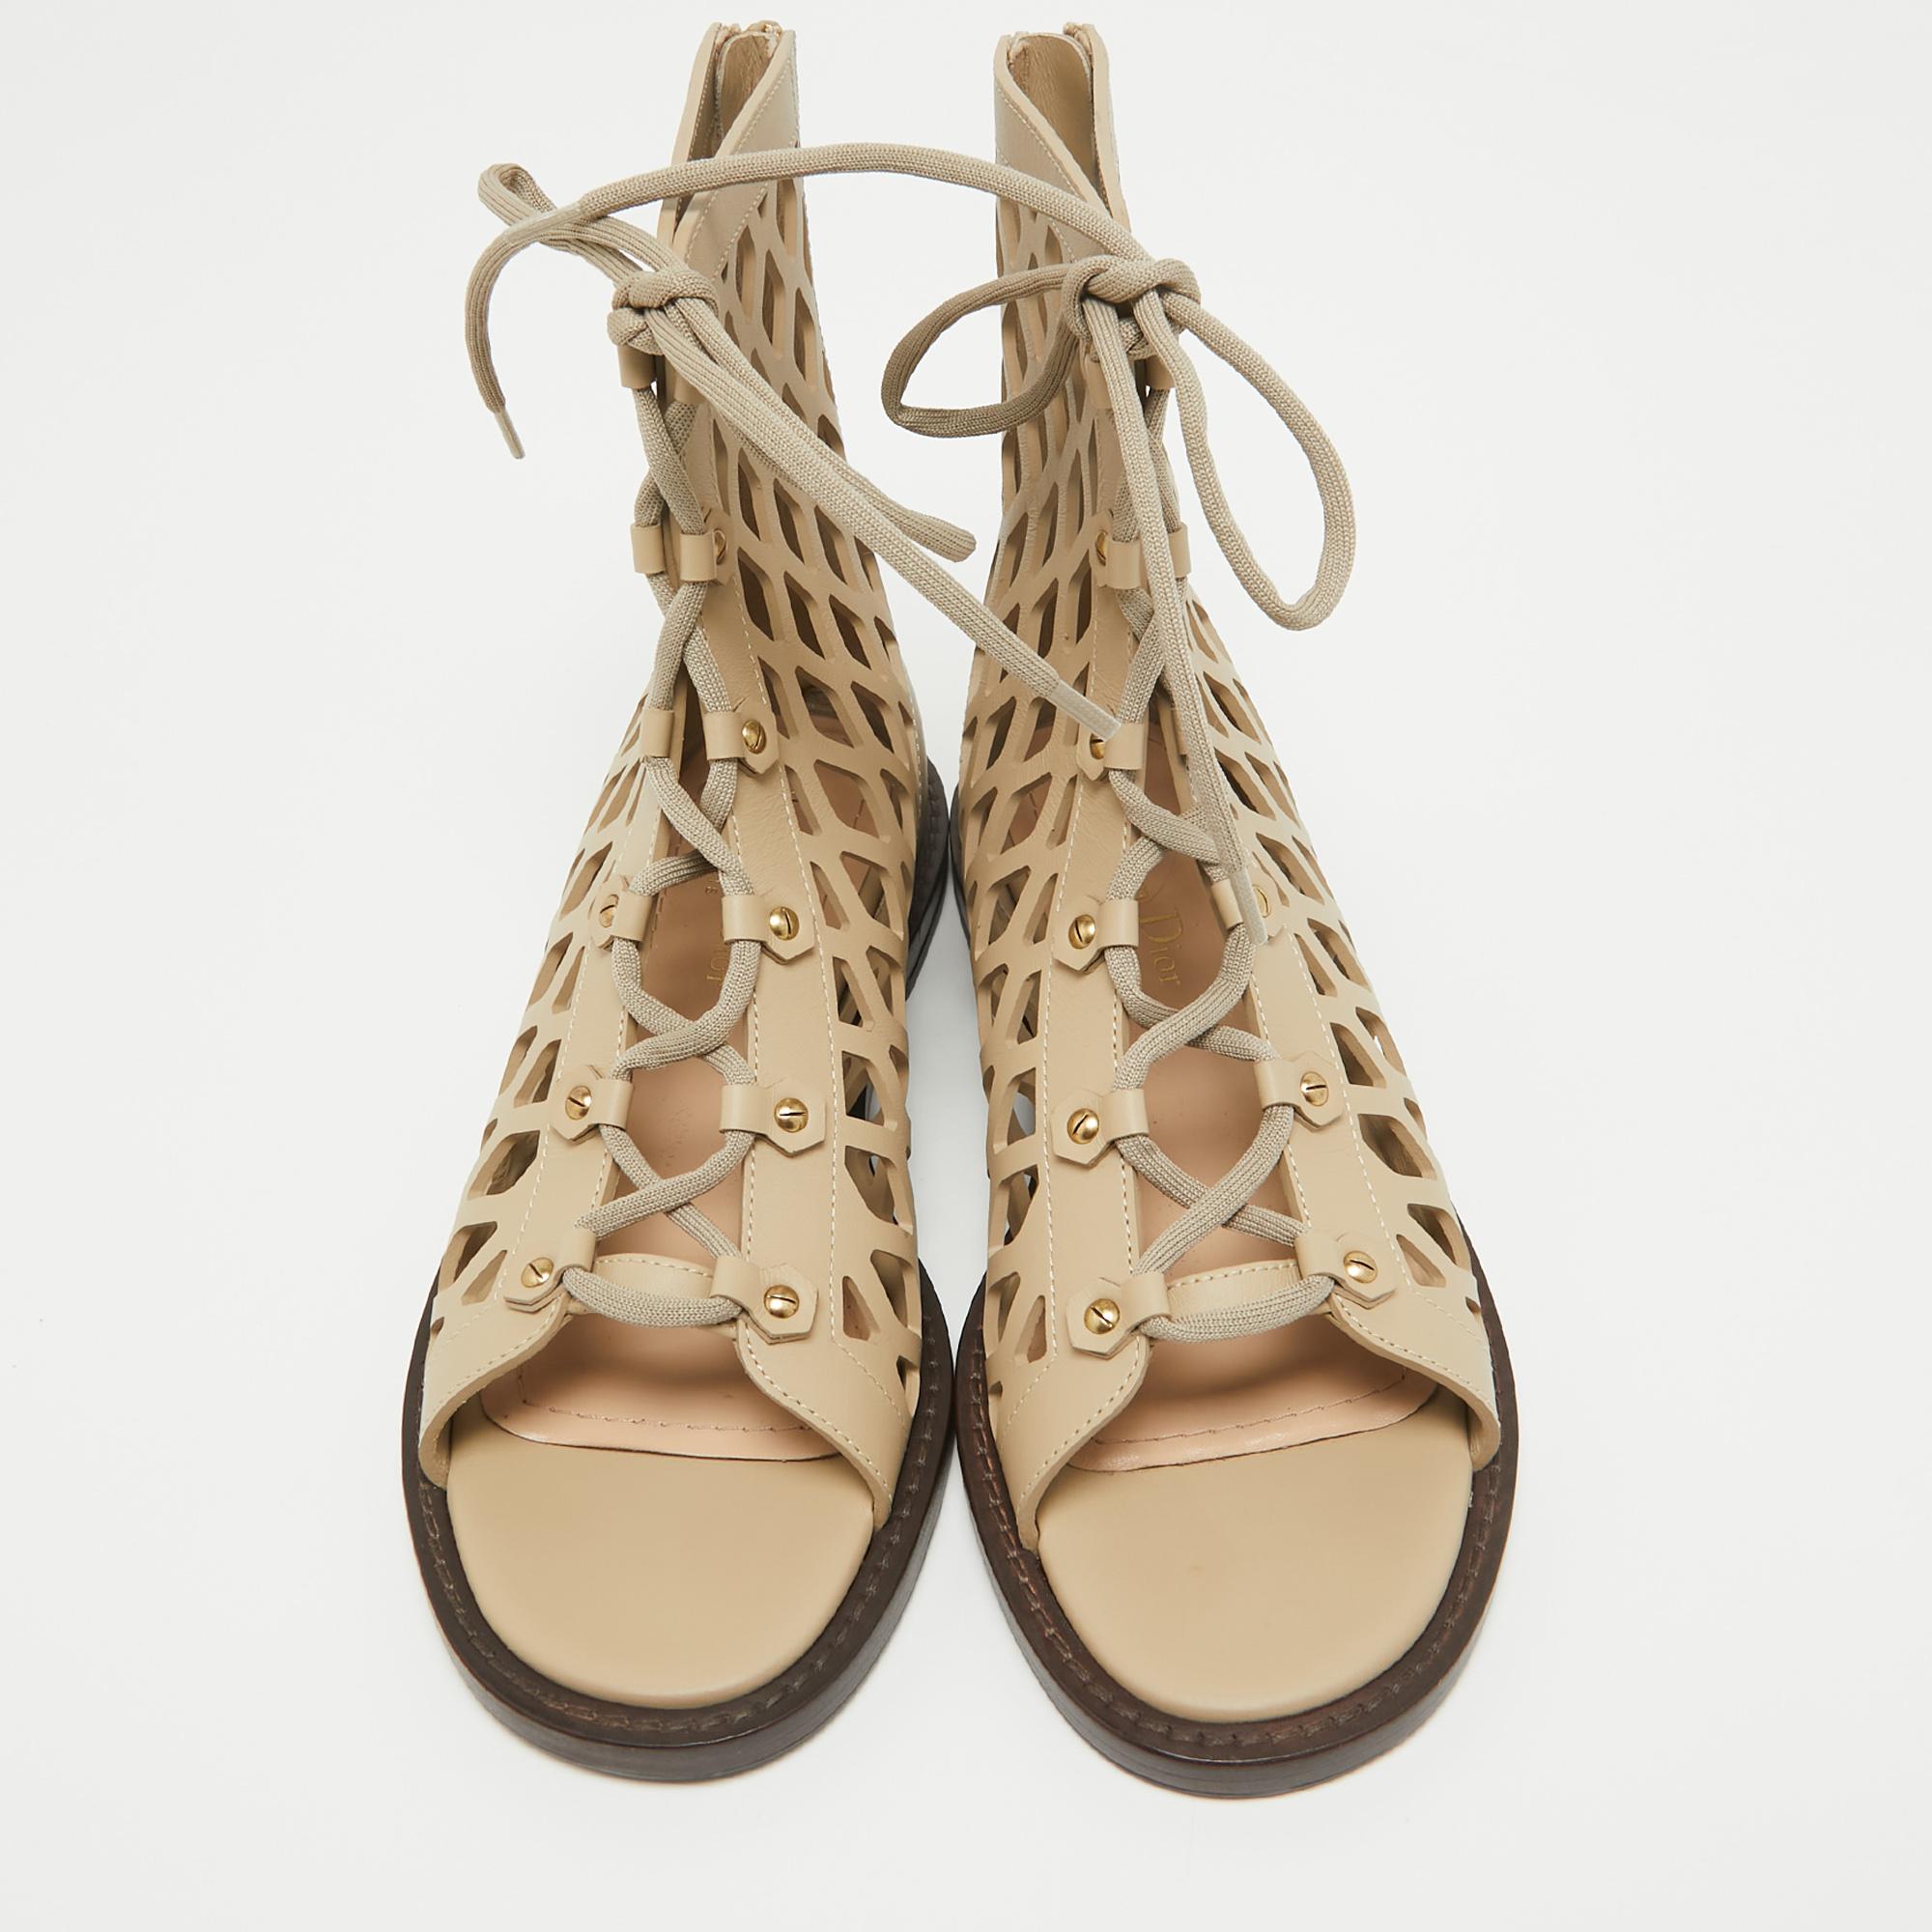 Wear these designer sandals to spruce up any outfit. They are versatile, chic, and can be easily styled. Made using quality materials, these sandals are well-built and long-lasting.

Includes: Original Box, Info Card

